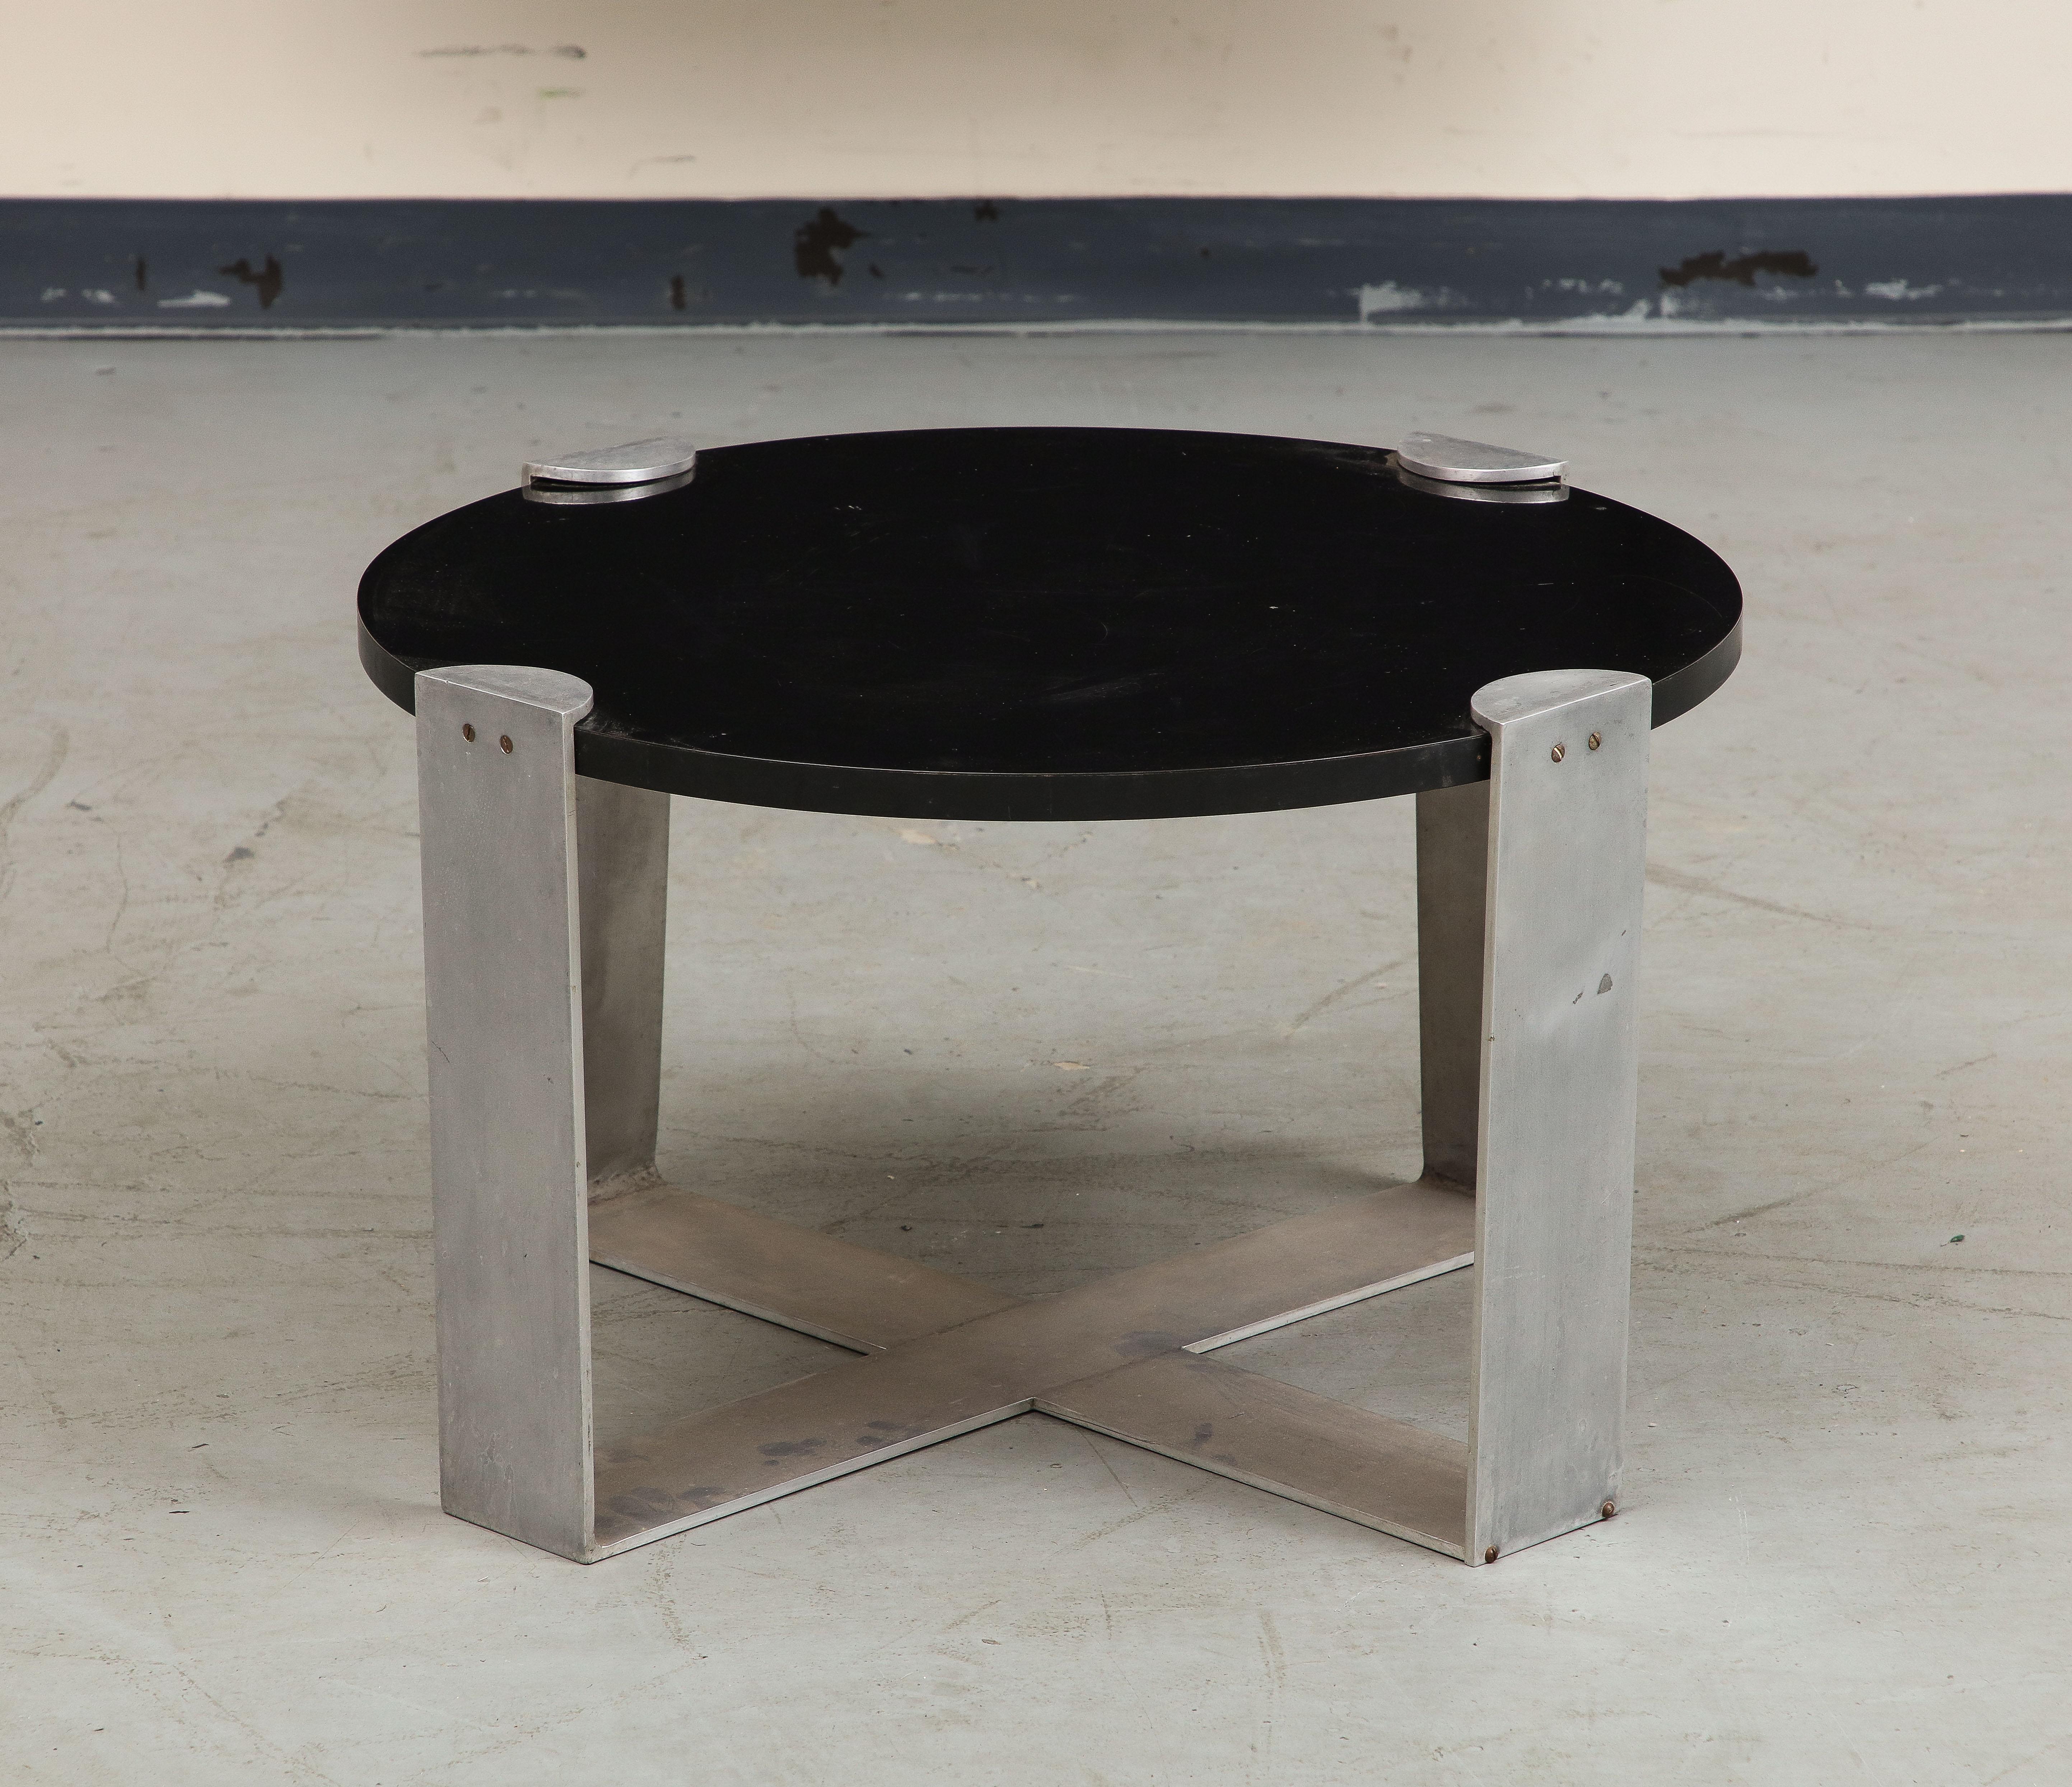 Midcentury Polished Steel and Wood Coffee Table, c. 1950 In Good Condition For Sale In Chicago, IL